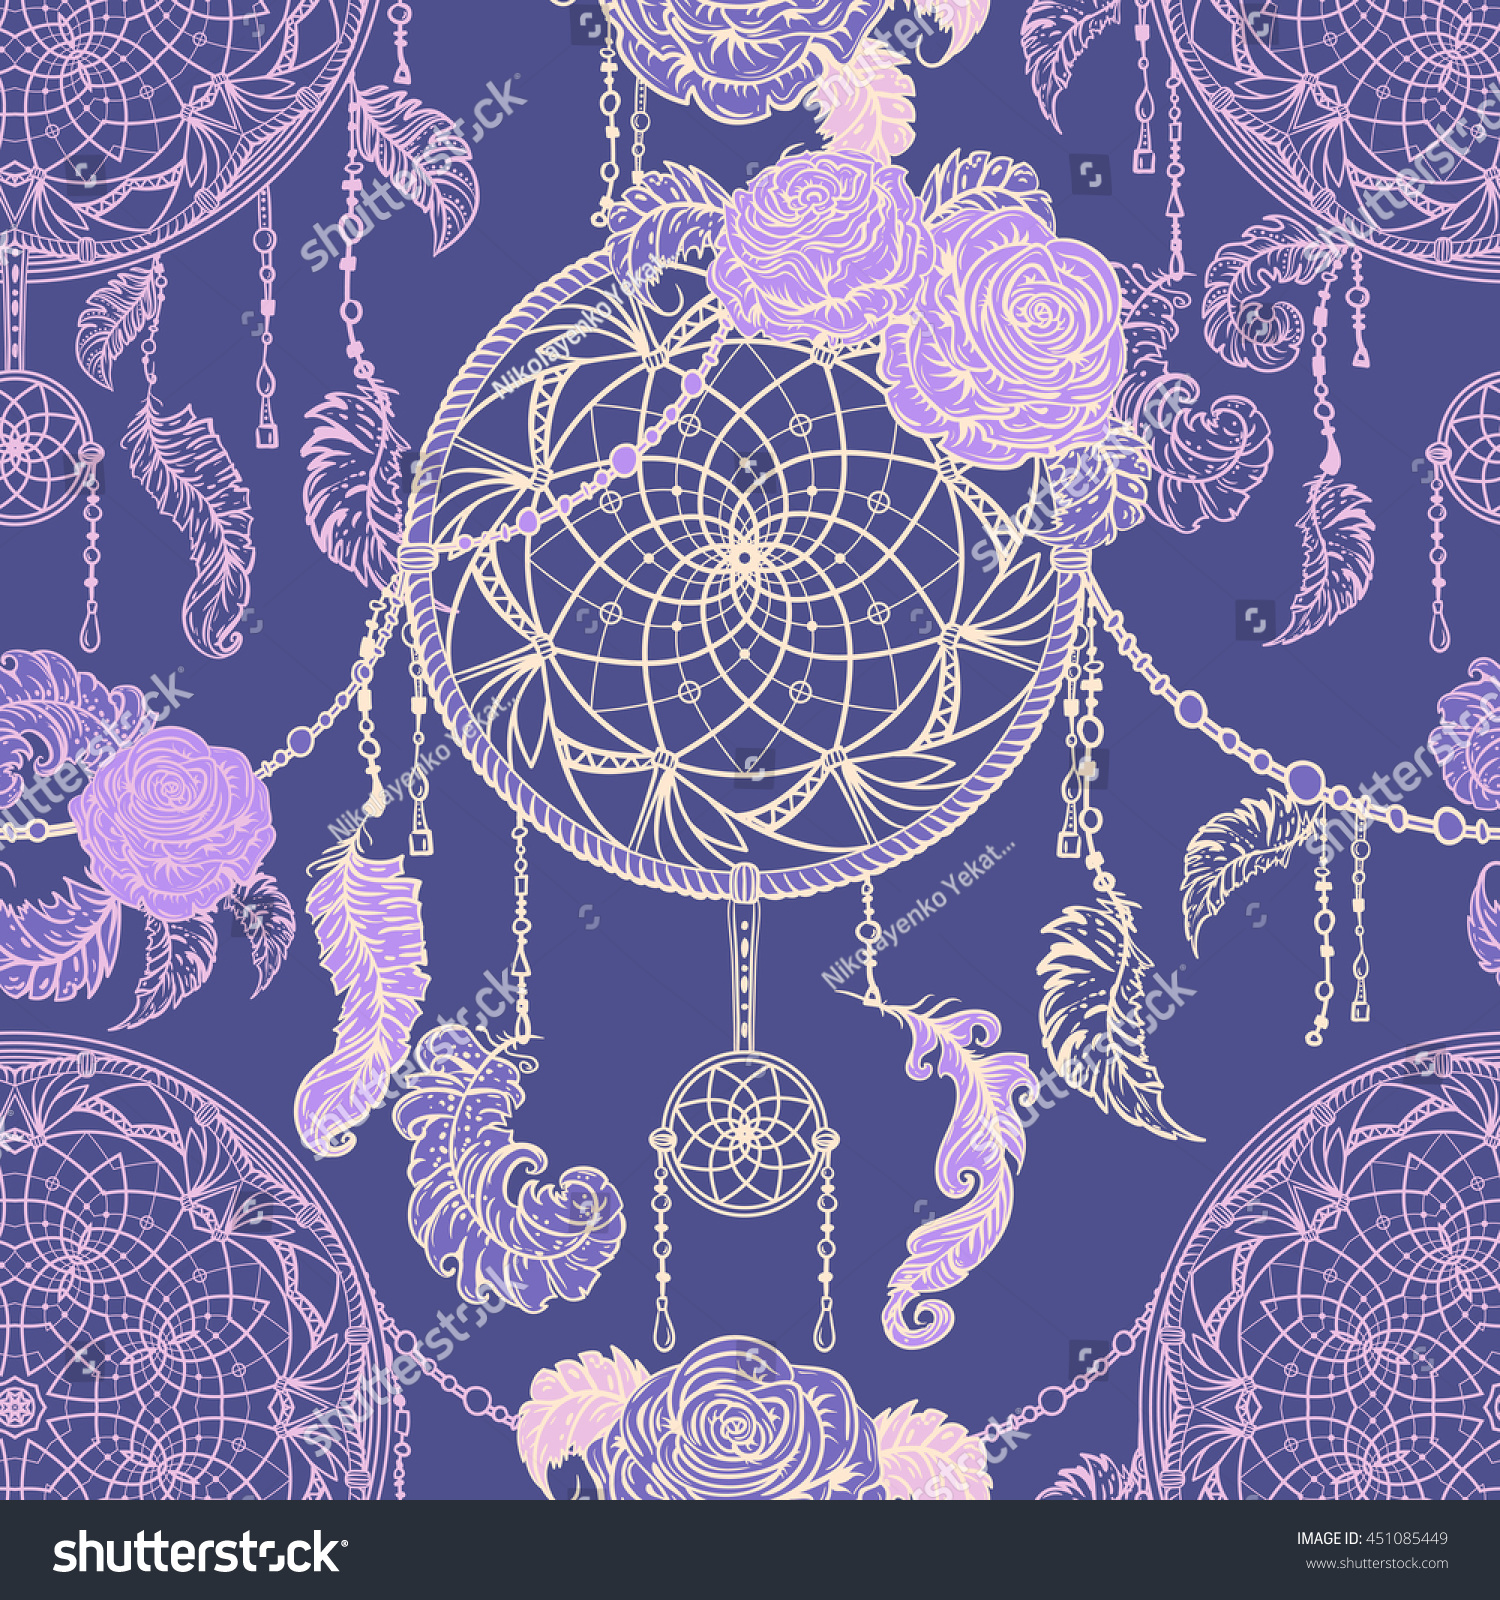 SVG of Seamless pattern with dream catcher, roses, leaves and feathers. Colorful hand drawn vector illustration in boho style. Design concept for retro banner, card, scrap booking, t-shirt, print, poster. svg